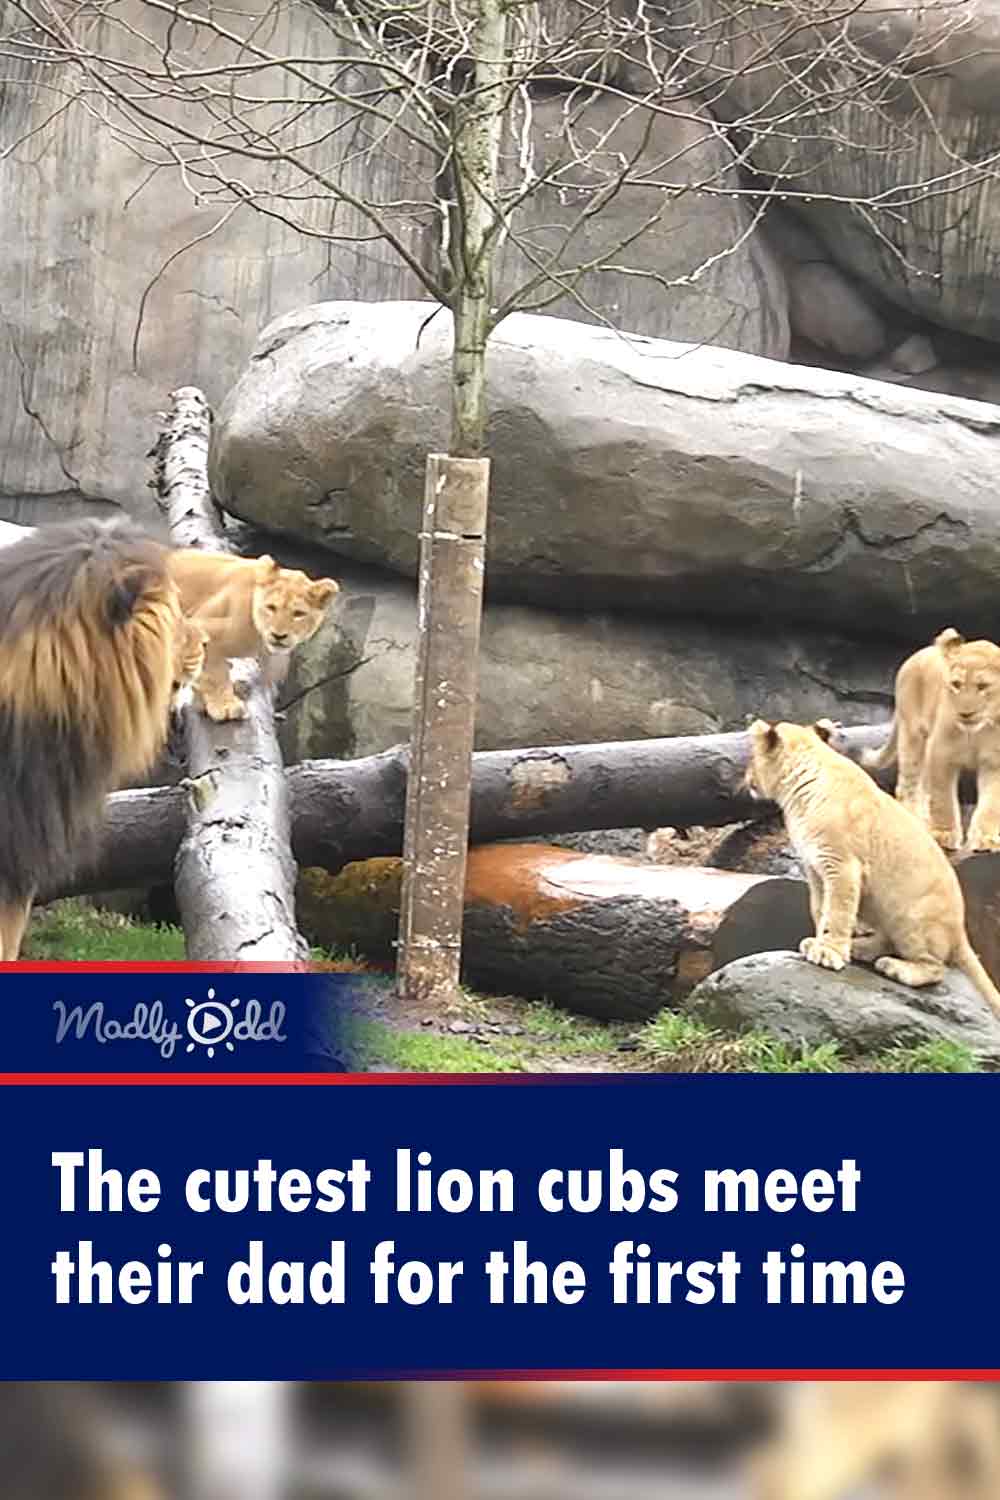 The cutest lion cubs meet their dad for the first time